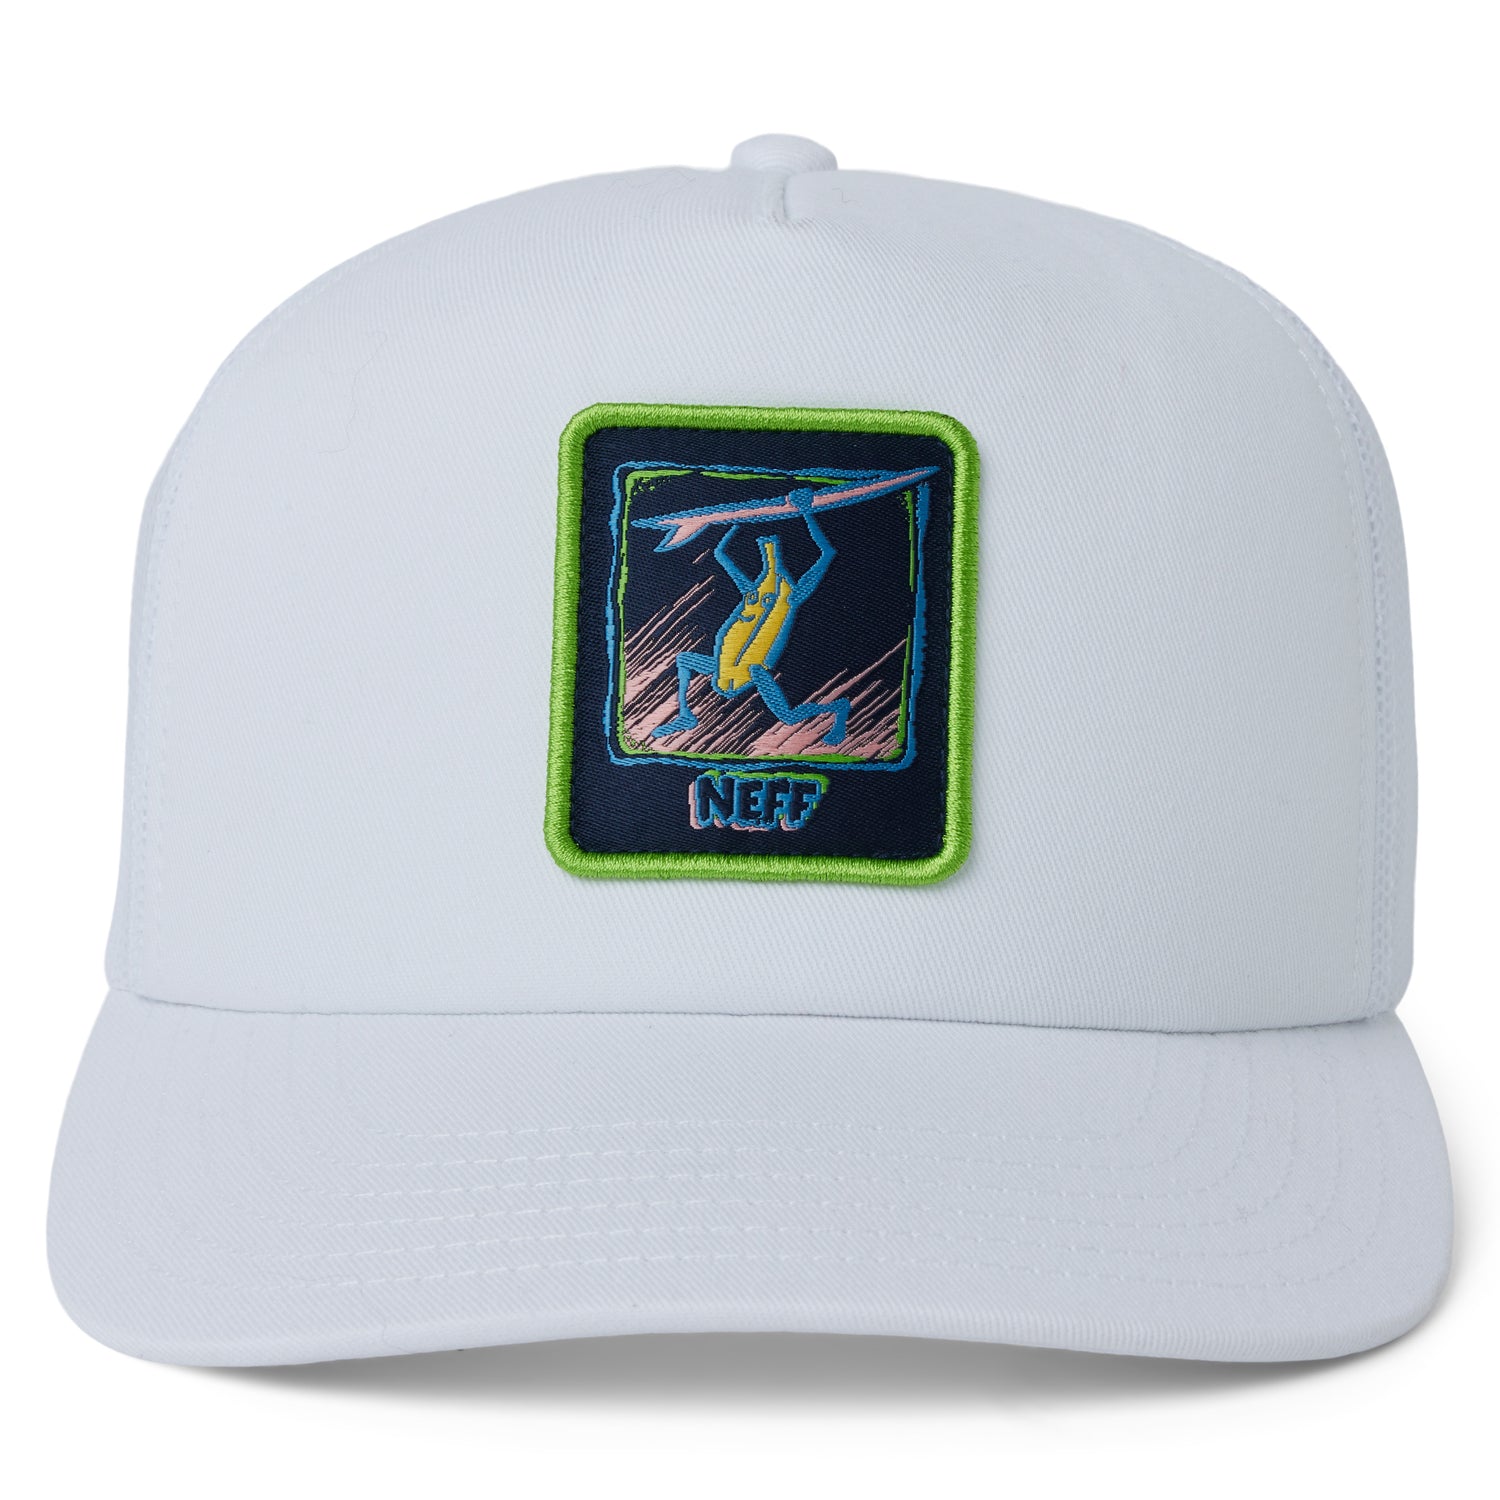 FORTNITE ICON CHARACTERS TRUCKER HAT - WHITE